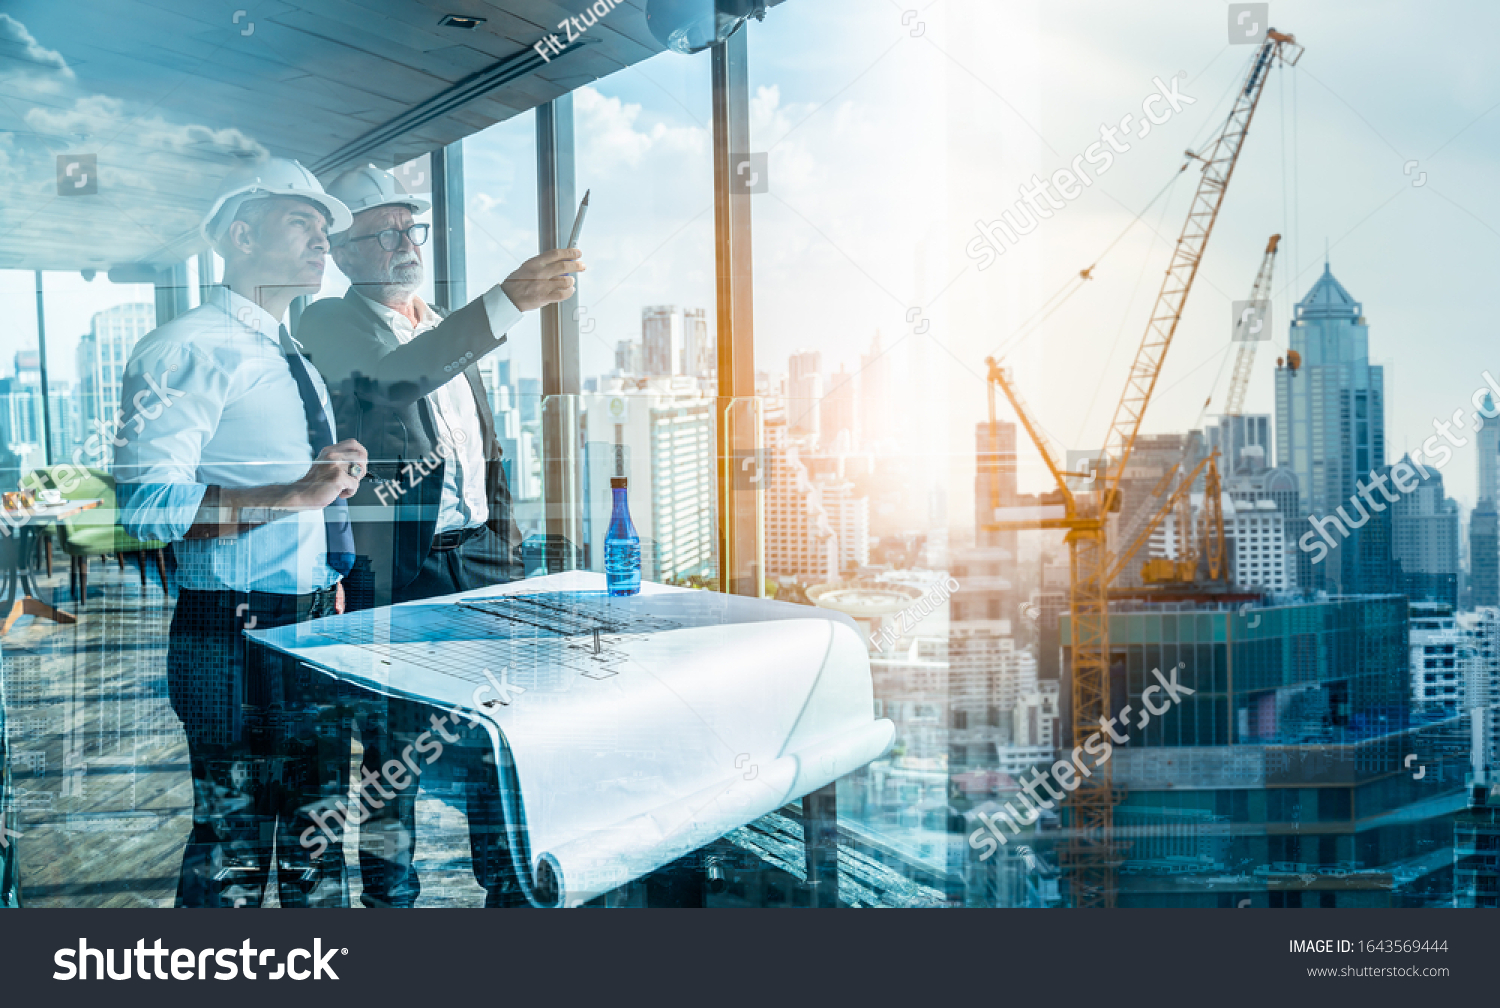 Two Engineer or Architect are analyzing blueprints while working on a new project on construction site with blue sky and city background.Architect supervising construction on terrace tower. #1643569444